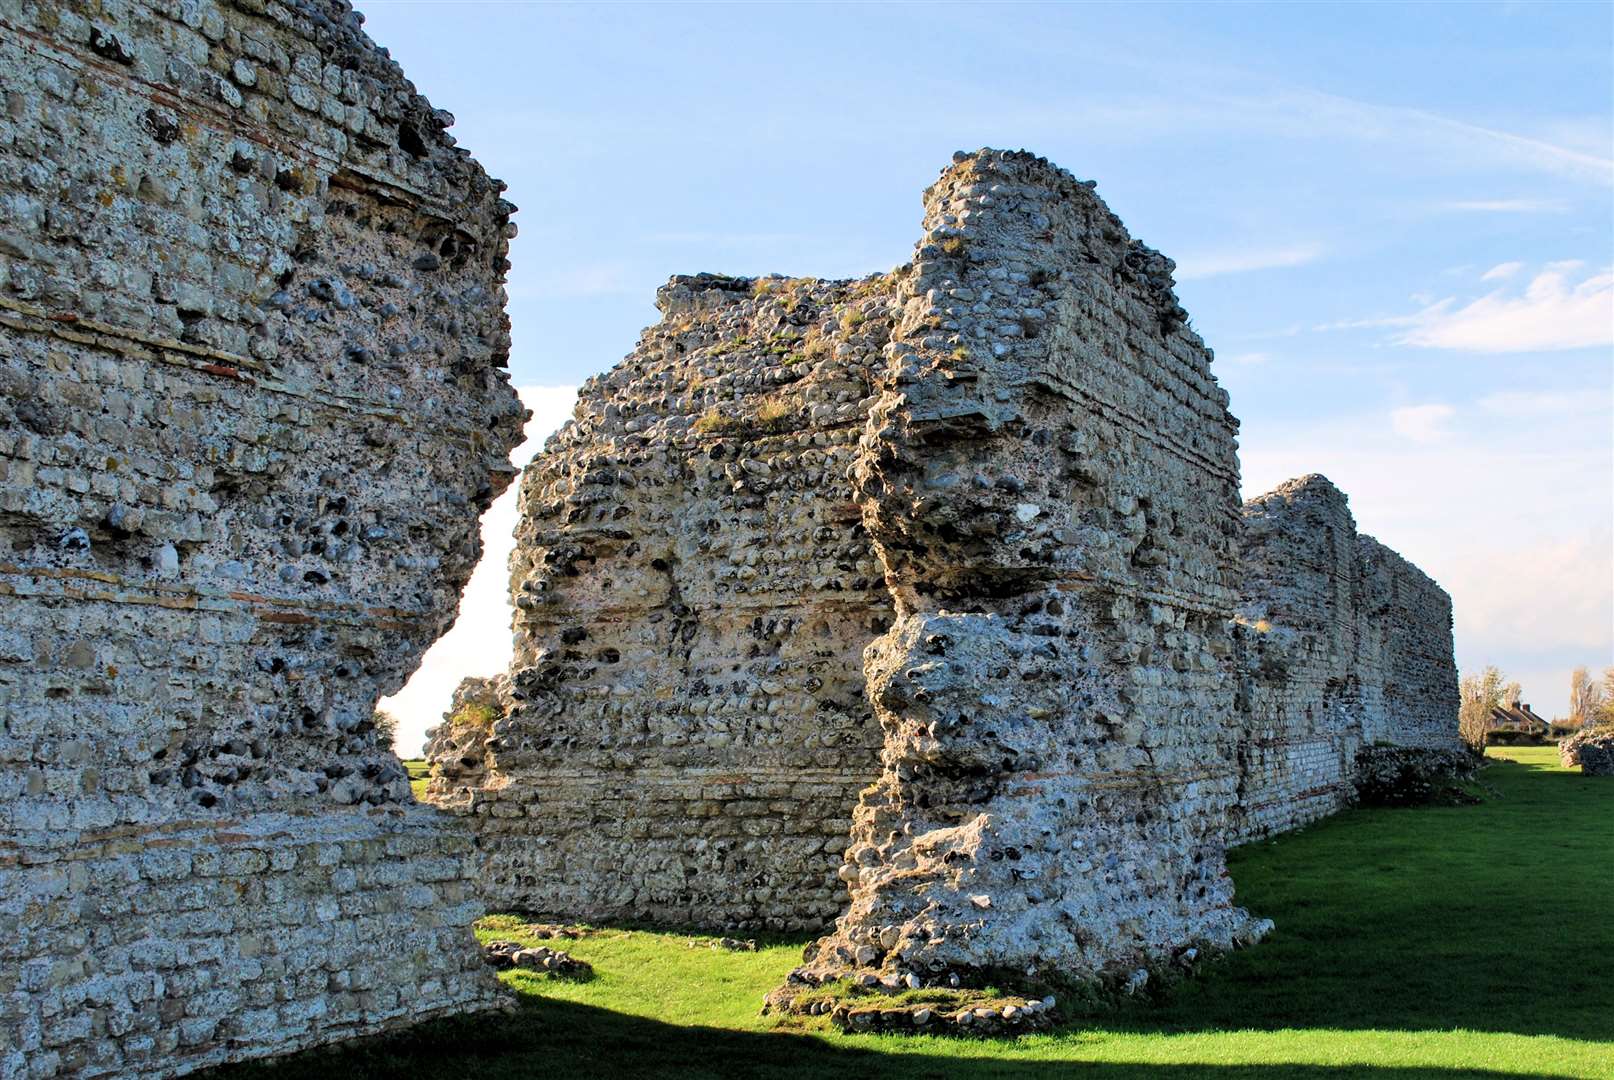 Richborough Roman Fort; the usurper Constantine III probably shipped the last Roman field army of Britain through this port on his doomed attempt to seize the throne, triggering the complete economic collapse of Roman Britain. Image: John Lambshead